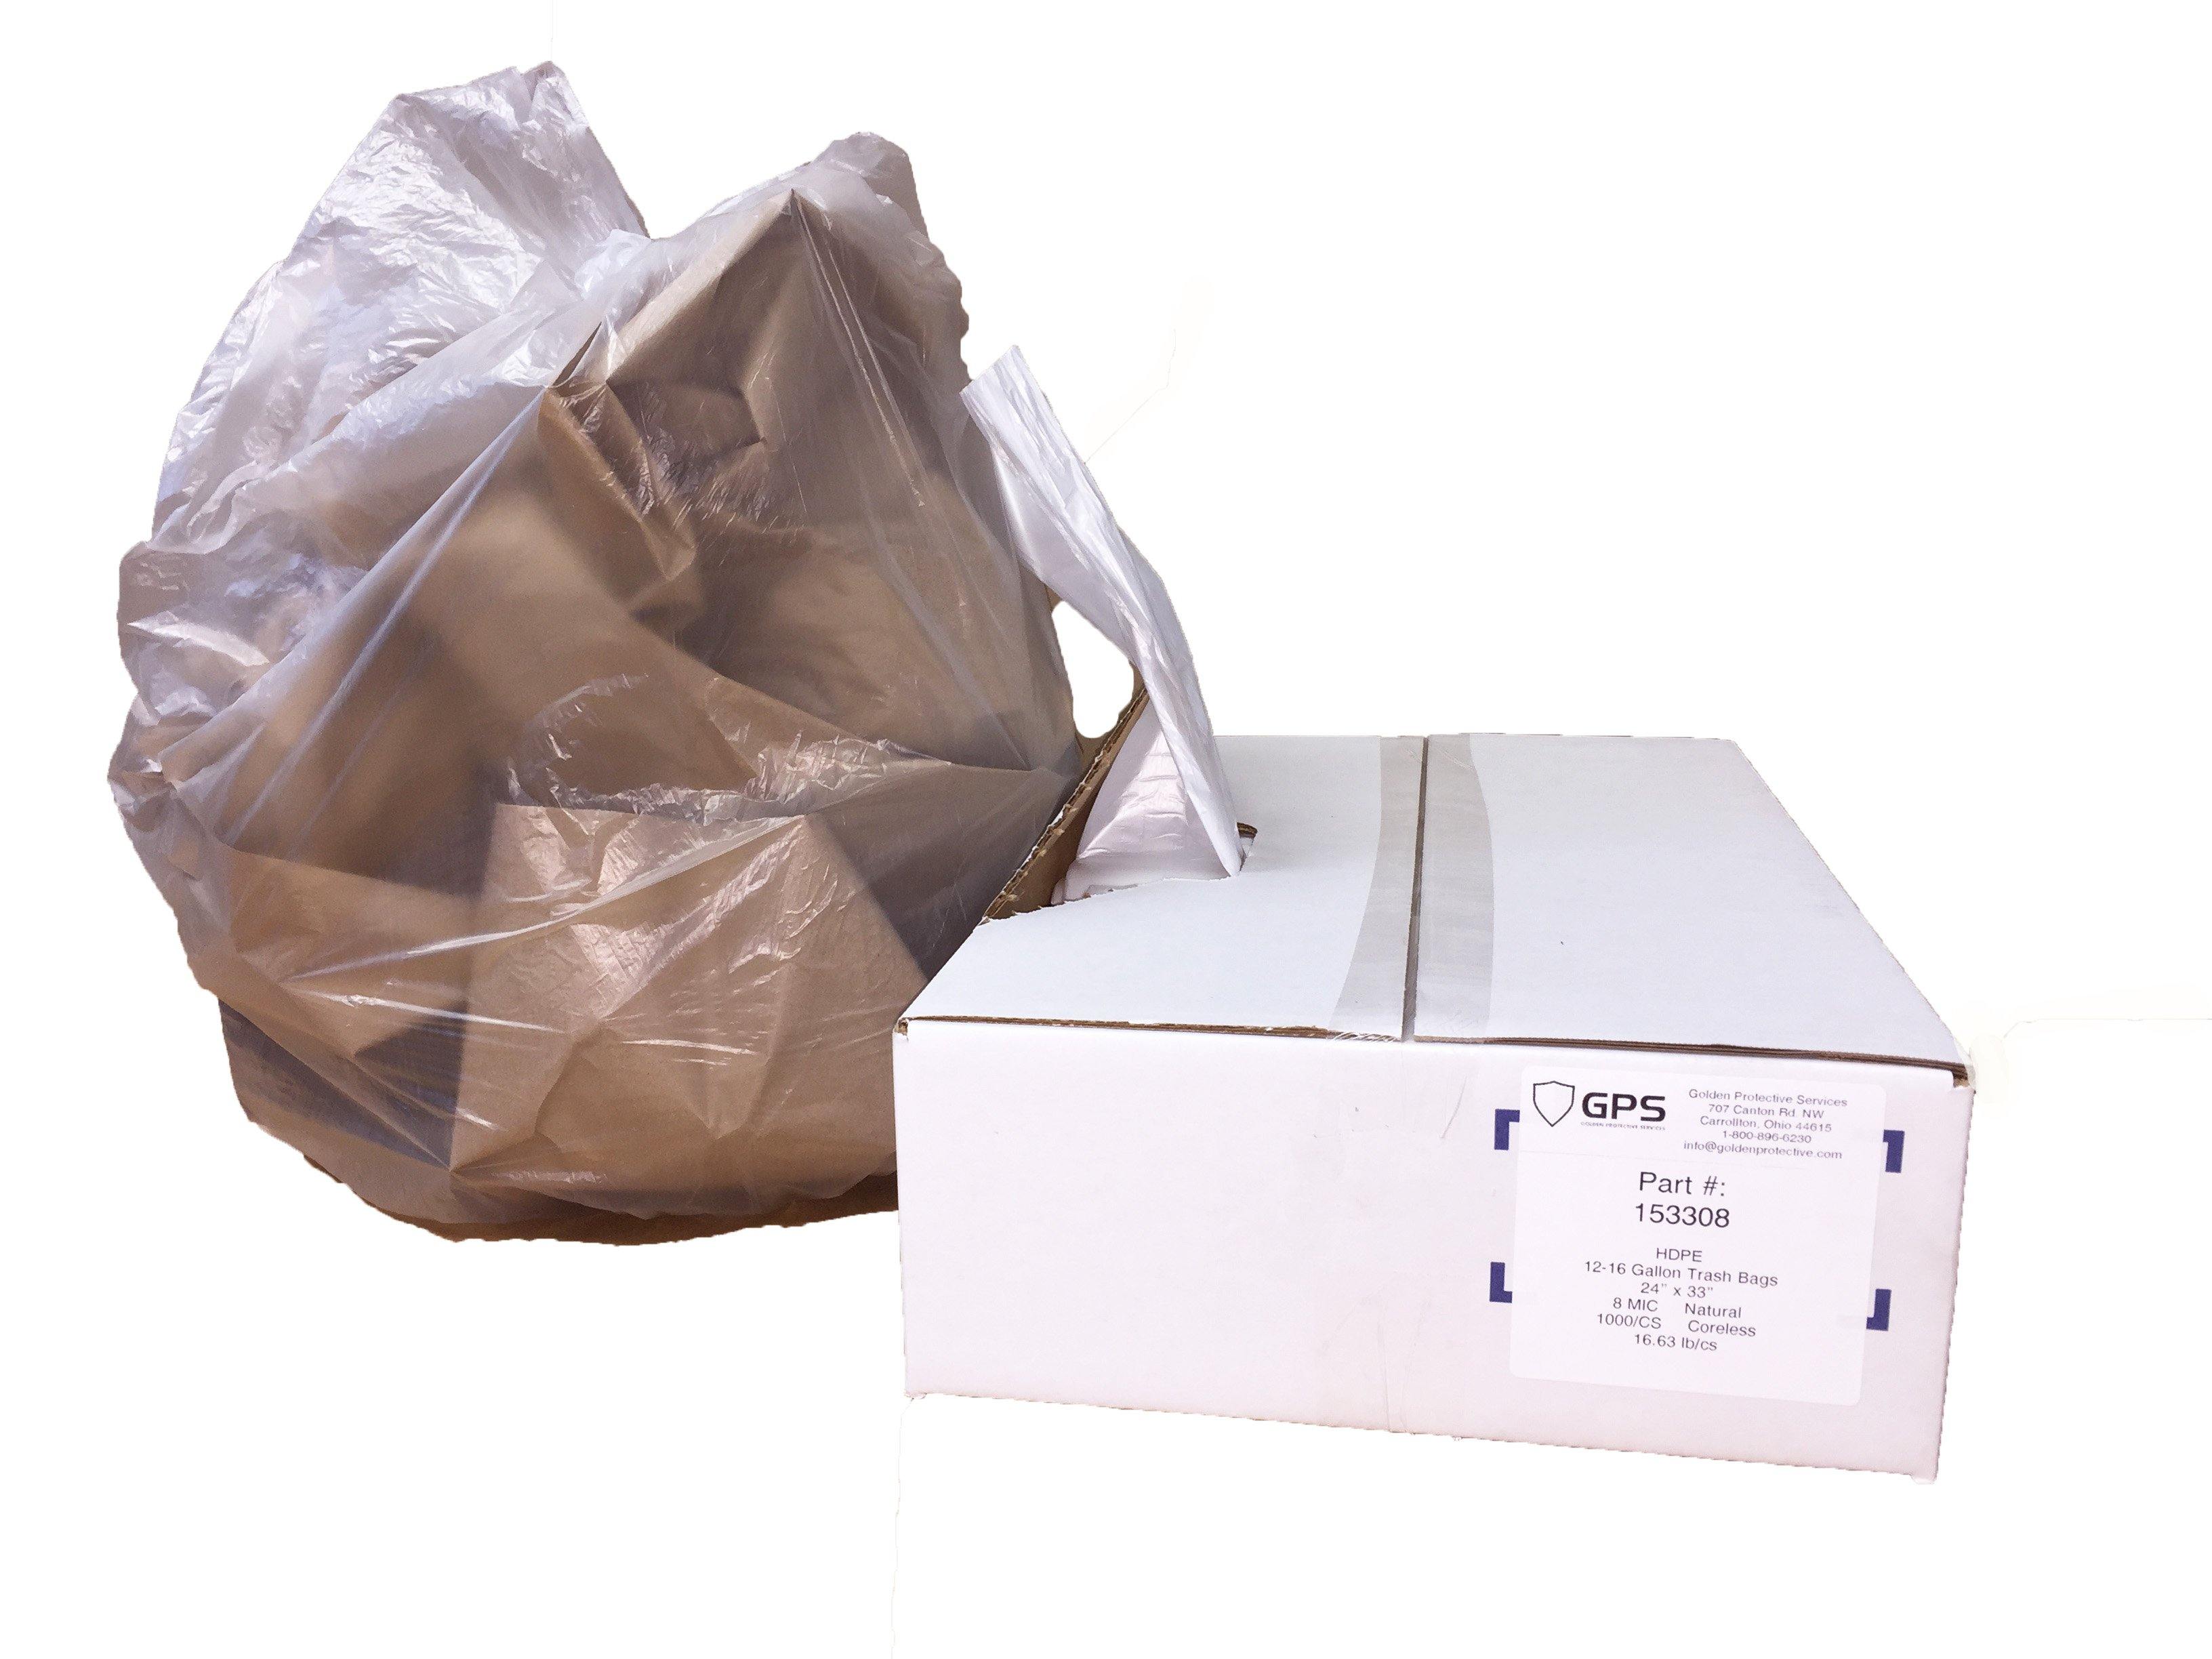 General Supply High-Density Can Liners, 16 gal, 6 microns, 24 x 31, Natural, 1,000/Carton